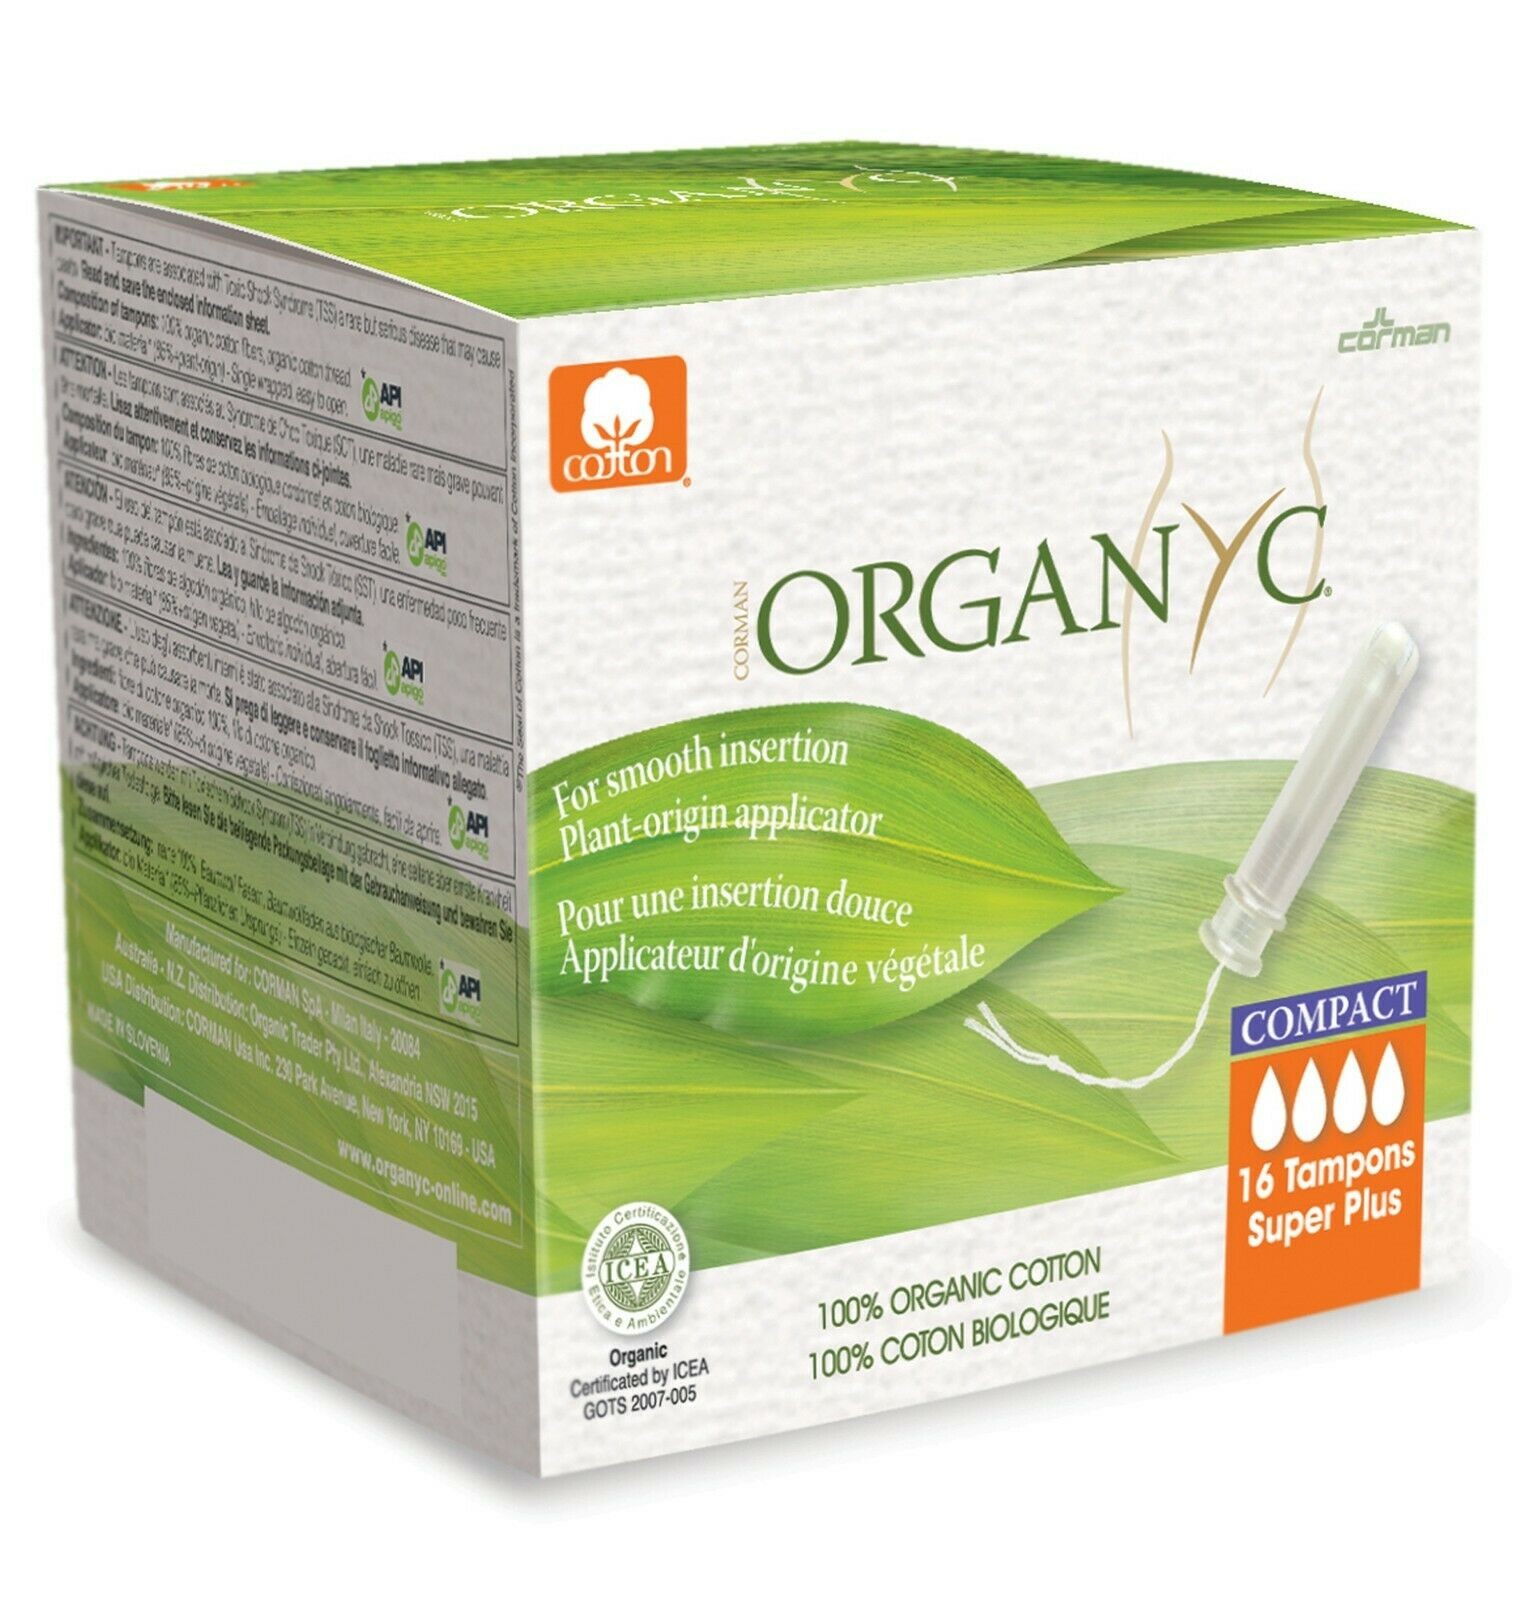 Organyc Compact Tampons Super Plus with Applicator Organic Cotton 